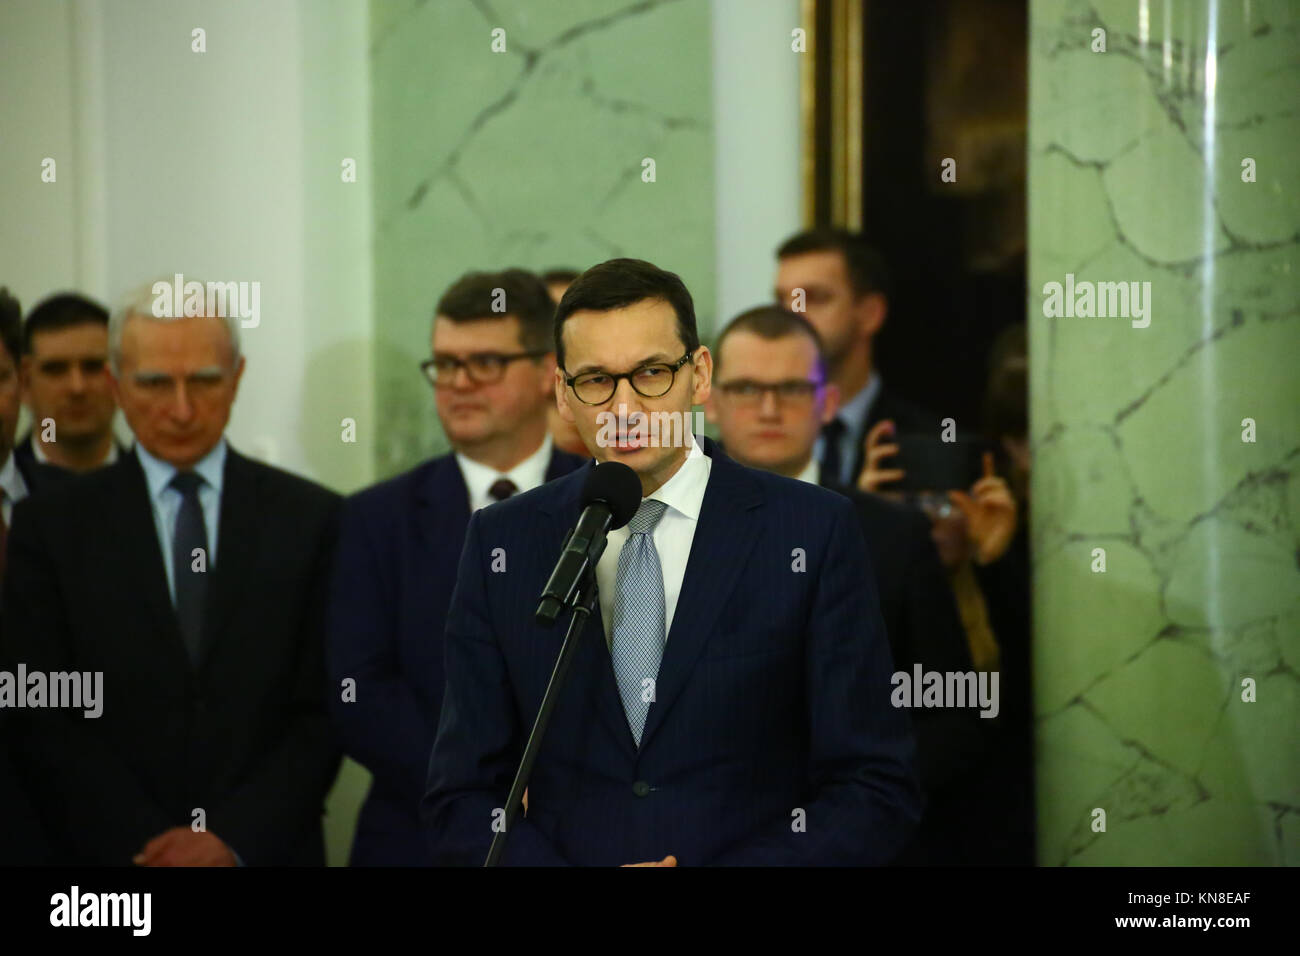 Warsaw, Poland. 11th Dec, 2017.  President Duda appoints new Prime Minister Mateusz Morawiecki and new Council of Ministers with ceremony at Presidential Palace. Previous Prime Minister Beata Szydlo declared her dismission on Friday (8th December 2017). Credit: Jake Ratz/Alamy Live News Stock Photo